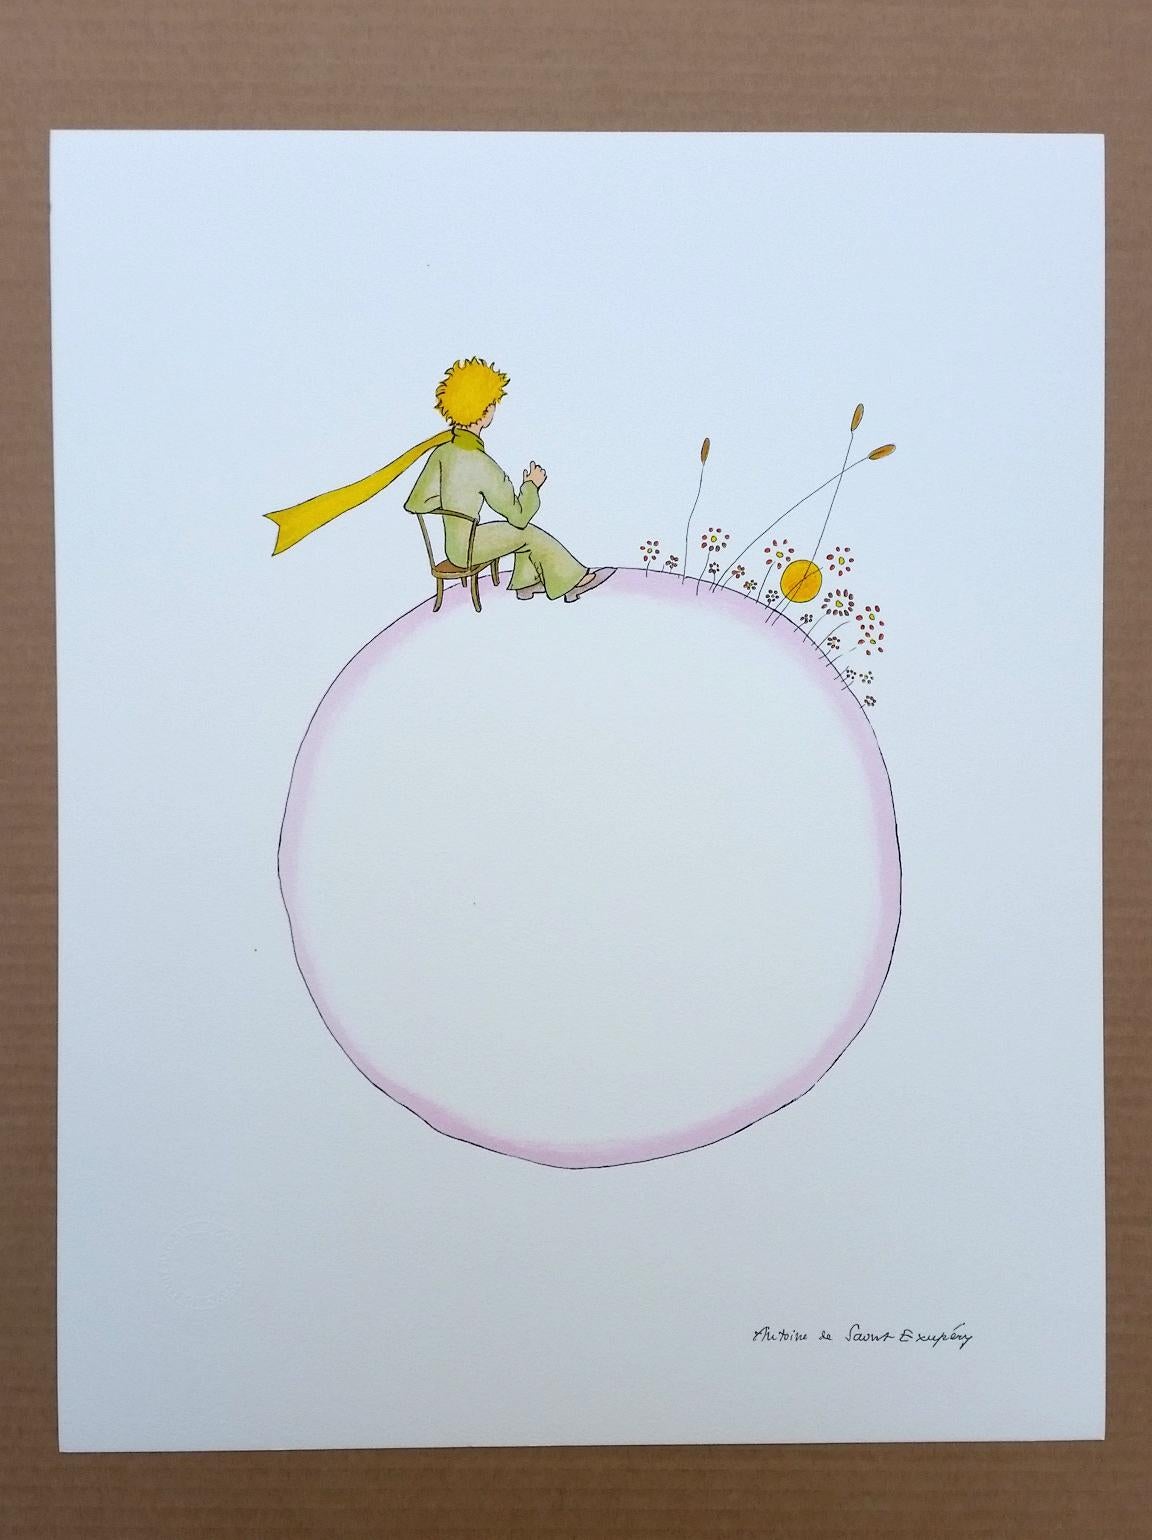 The Little Prince sitting on his volcano L - Print by Antoine de saint Exupery